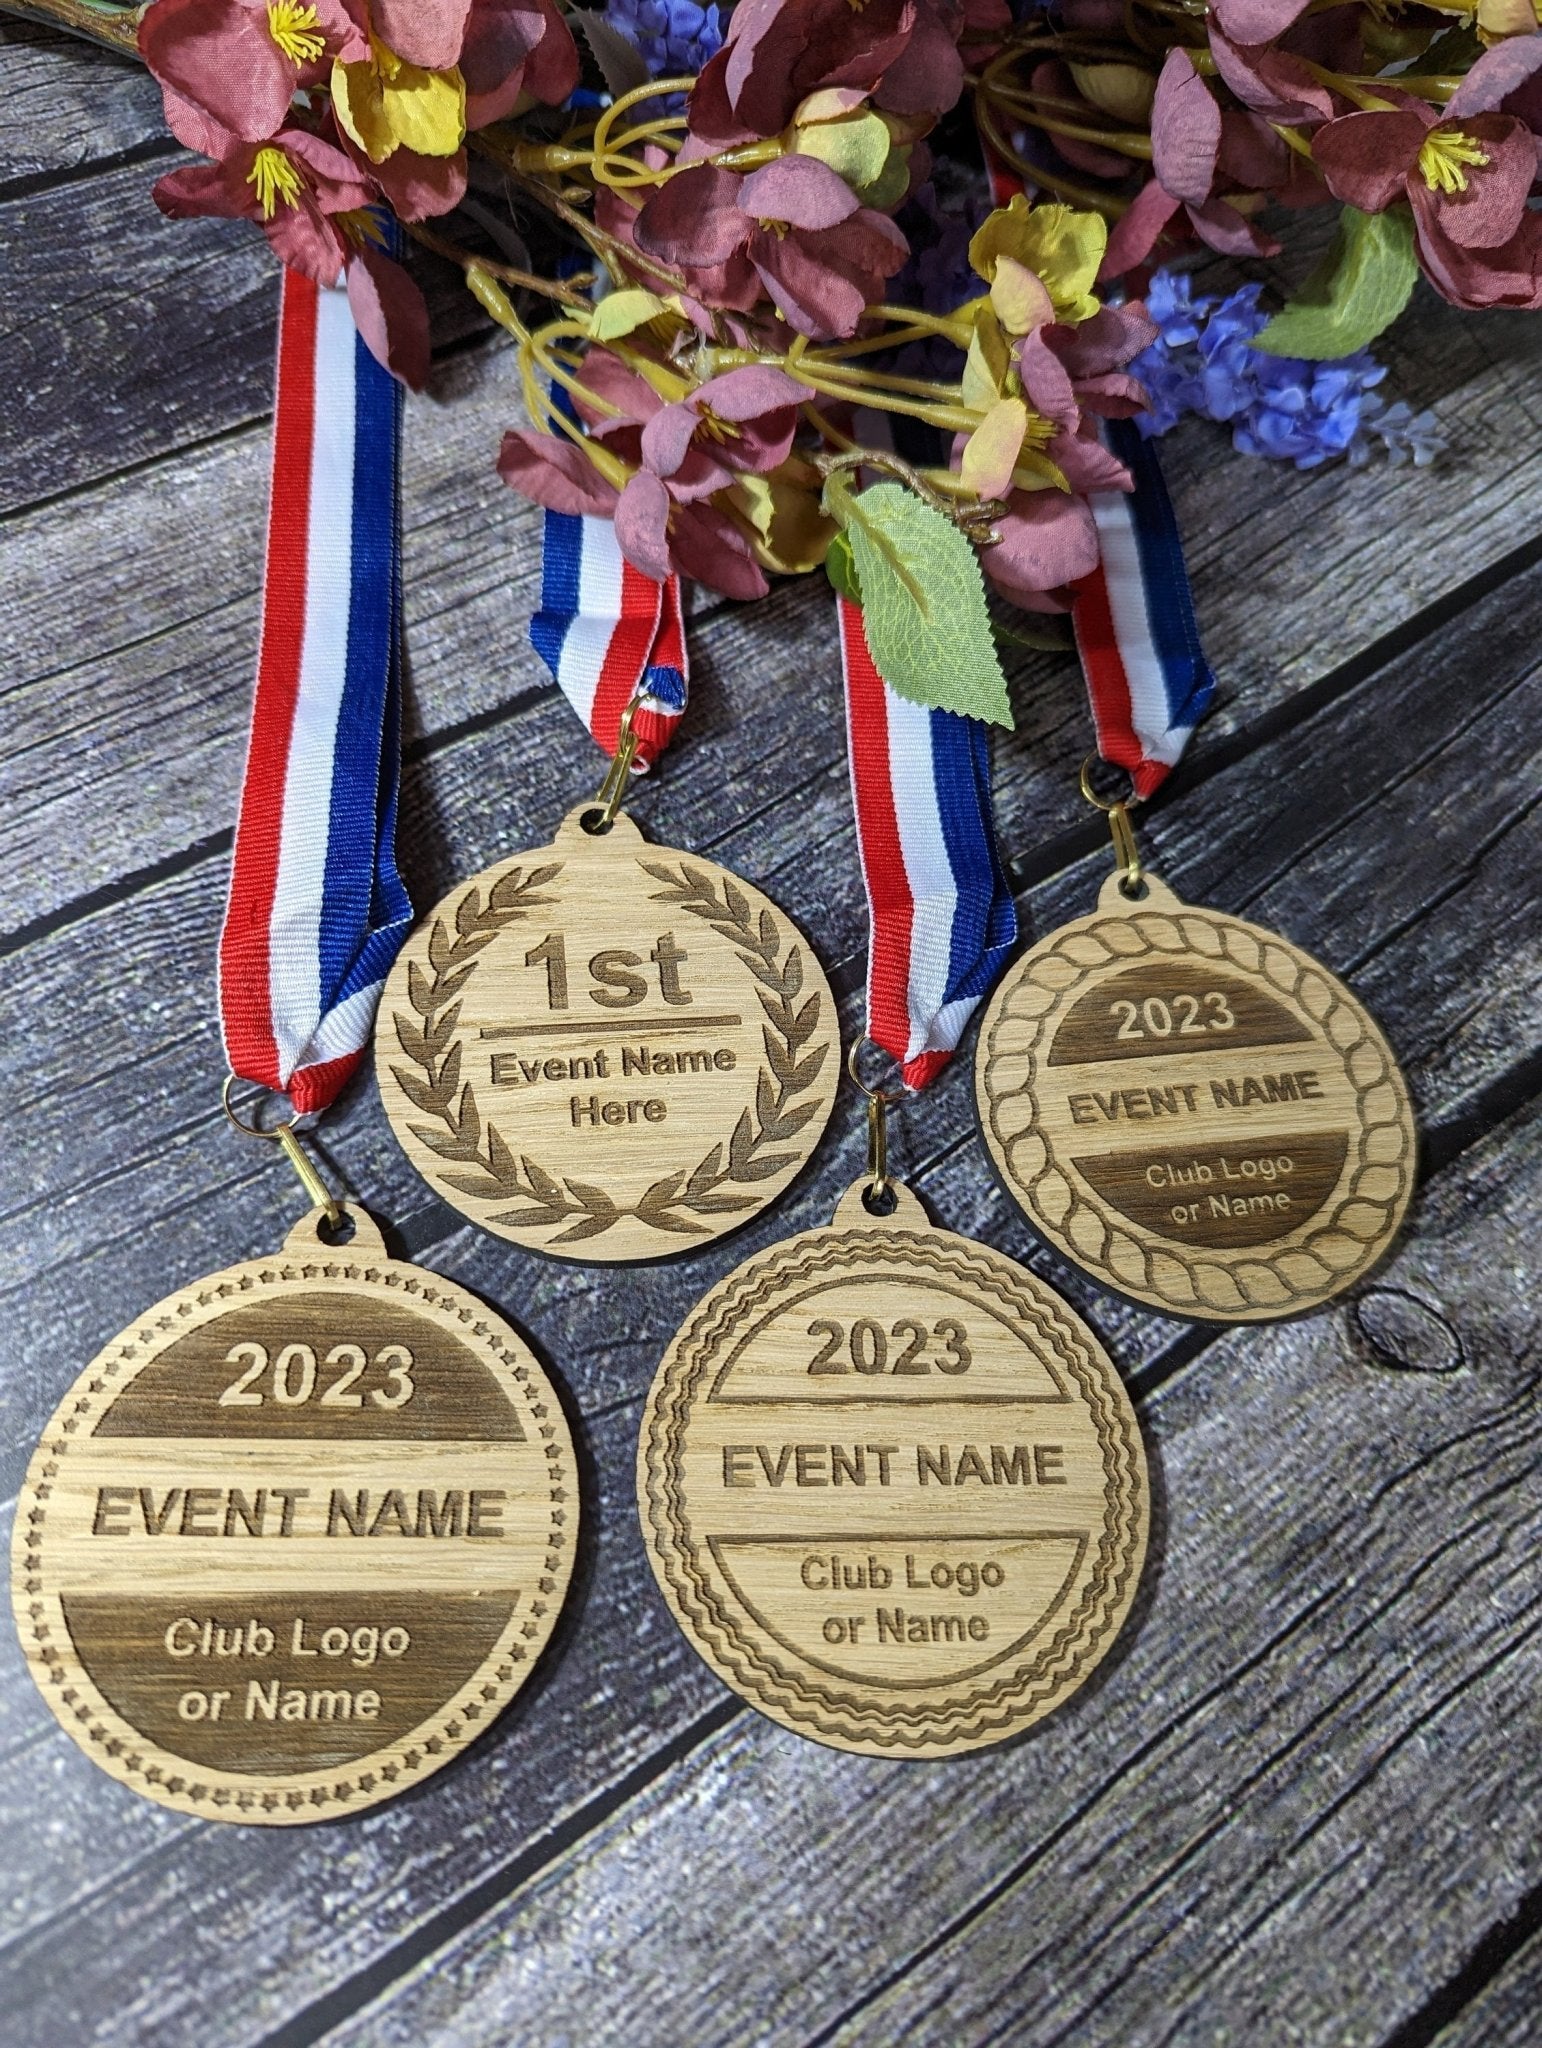 Bespoke Wooden Medals, Free Design Service, Sporting Events, Business Awards, Sponsorships, Custom Medals - CherryGroveCraft